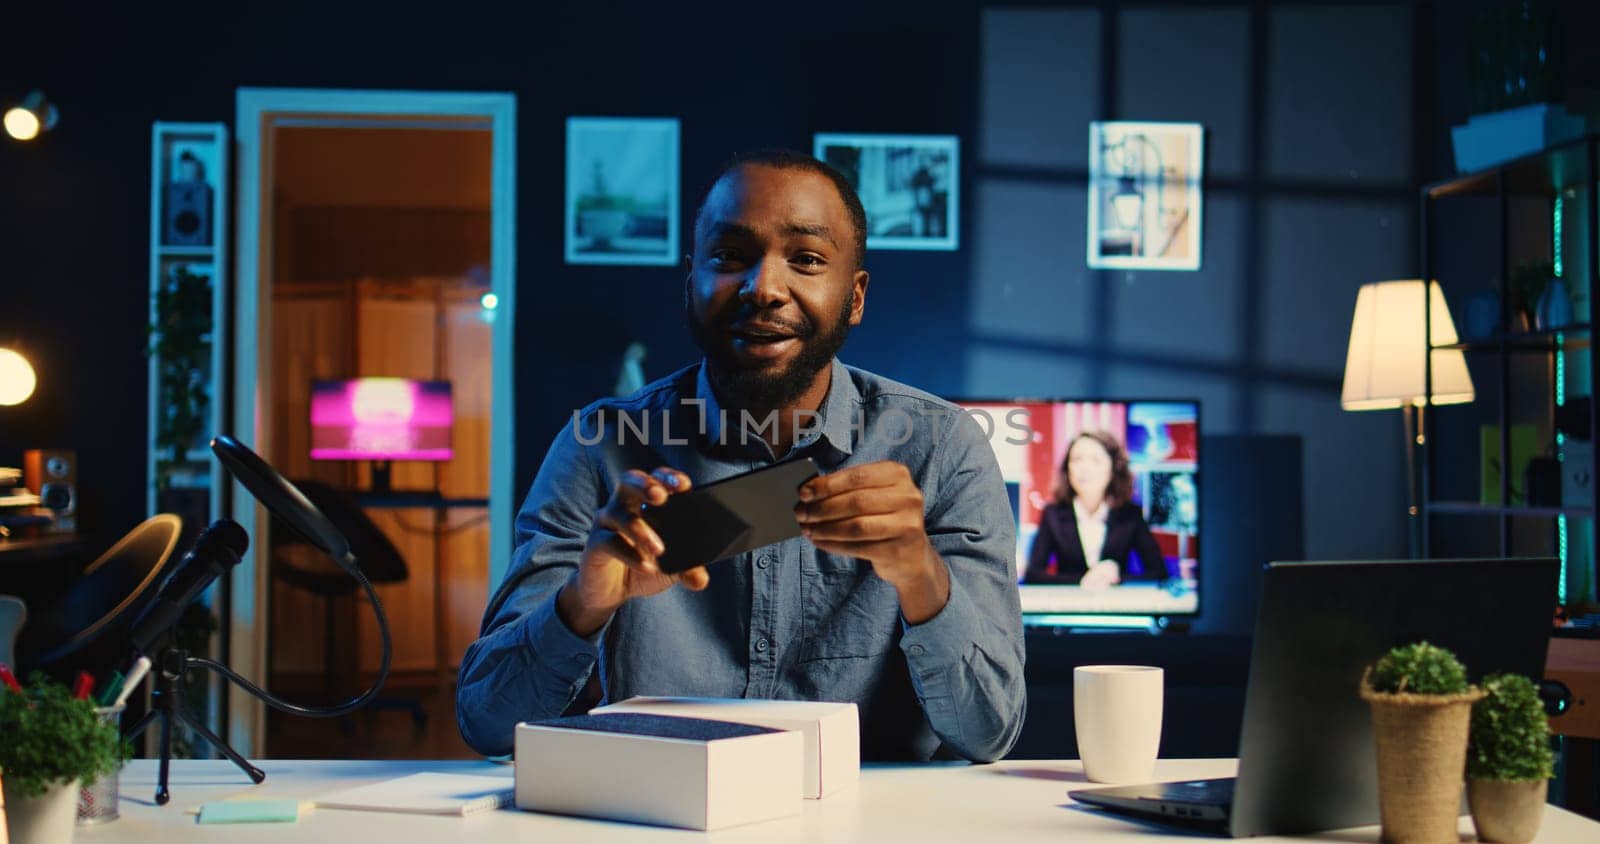 Influencer sponsored to unbox phone by DCStudio